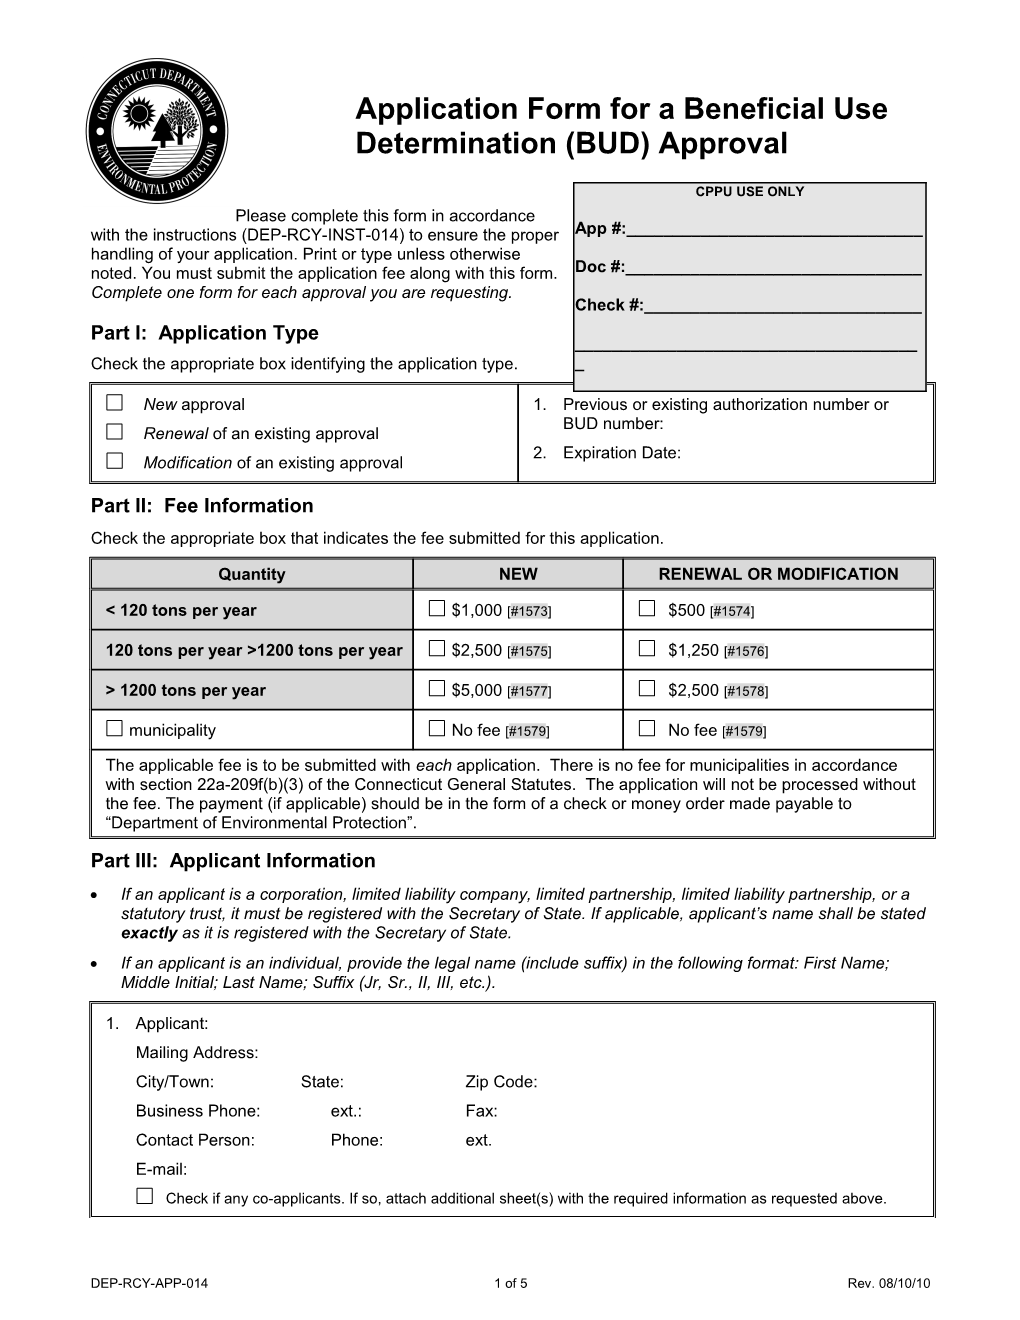 Application Form for a Beneficial Use Determination (BUD) Approval